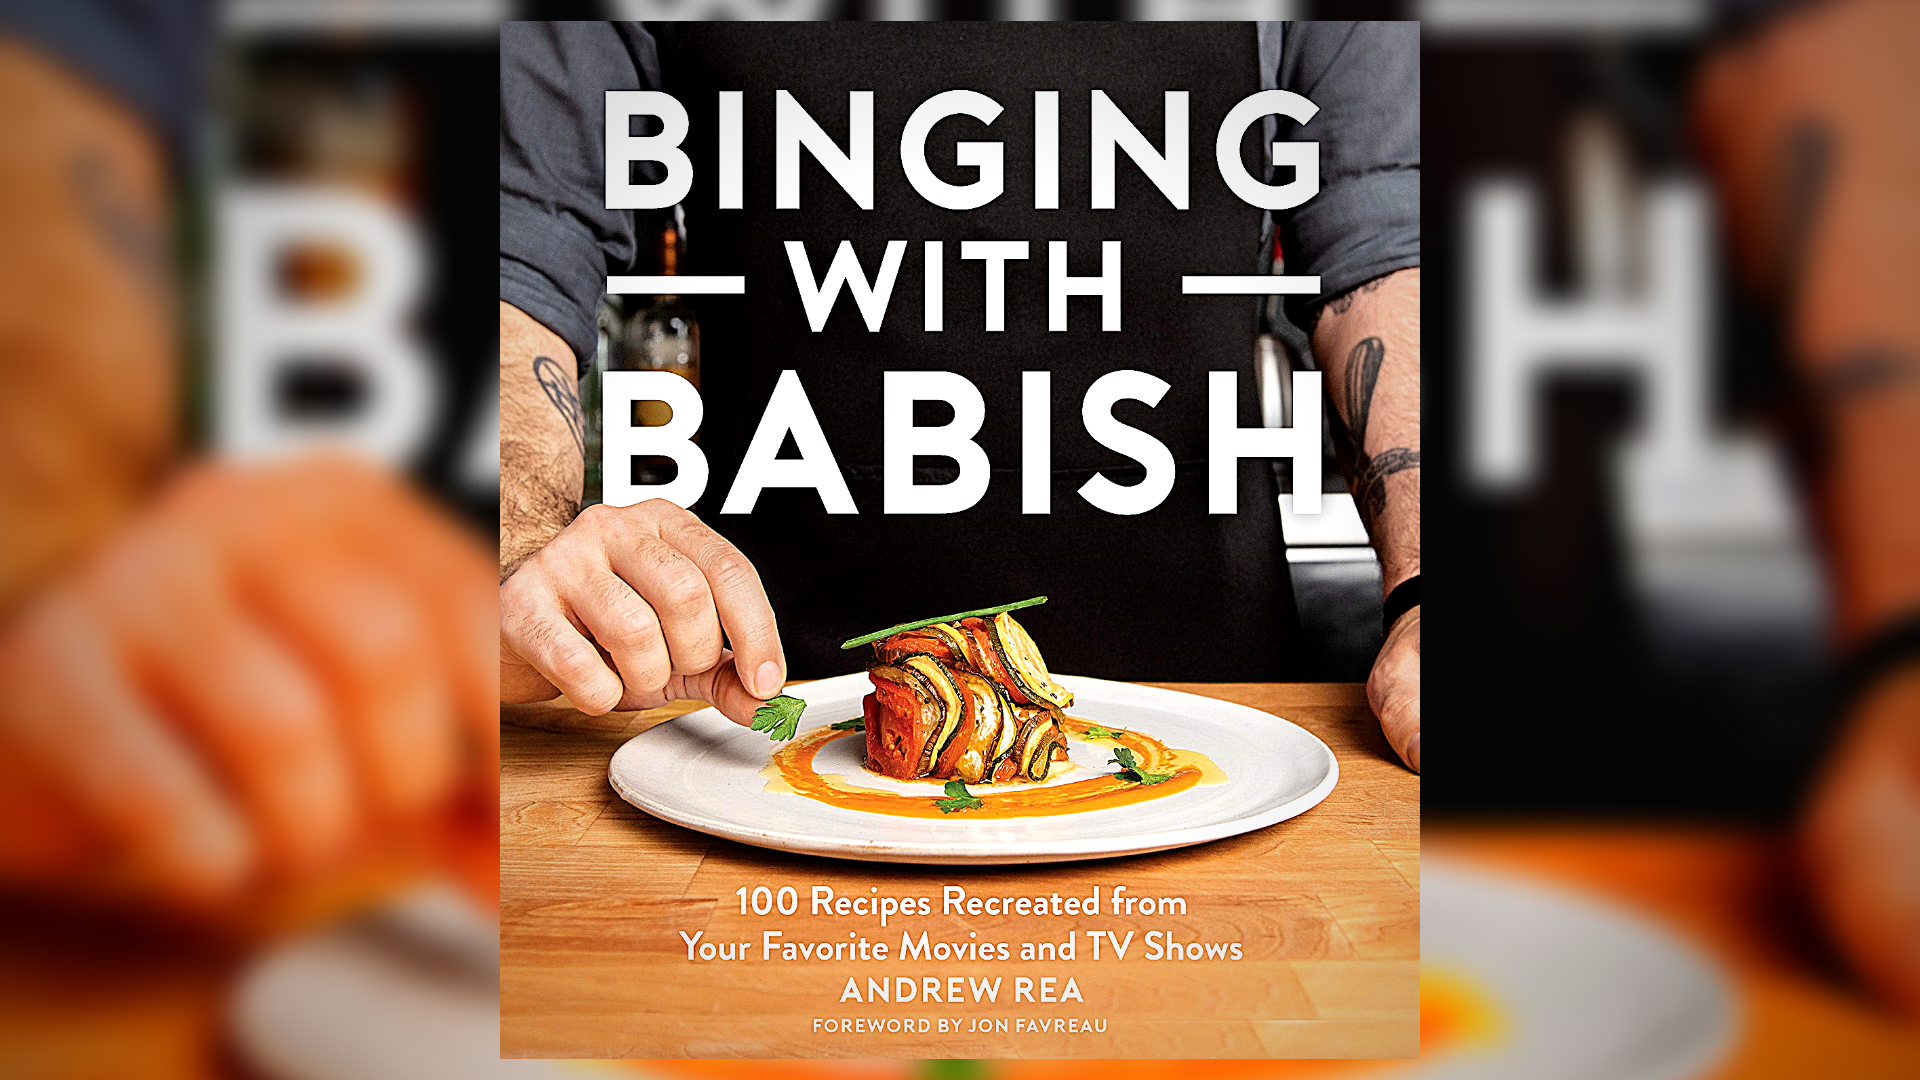 Andrew Rea is here to promote his new cookbook, Binging with Babish, and shows how movies and food inspire each other.